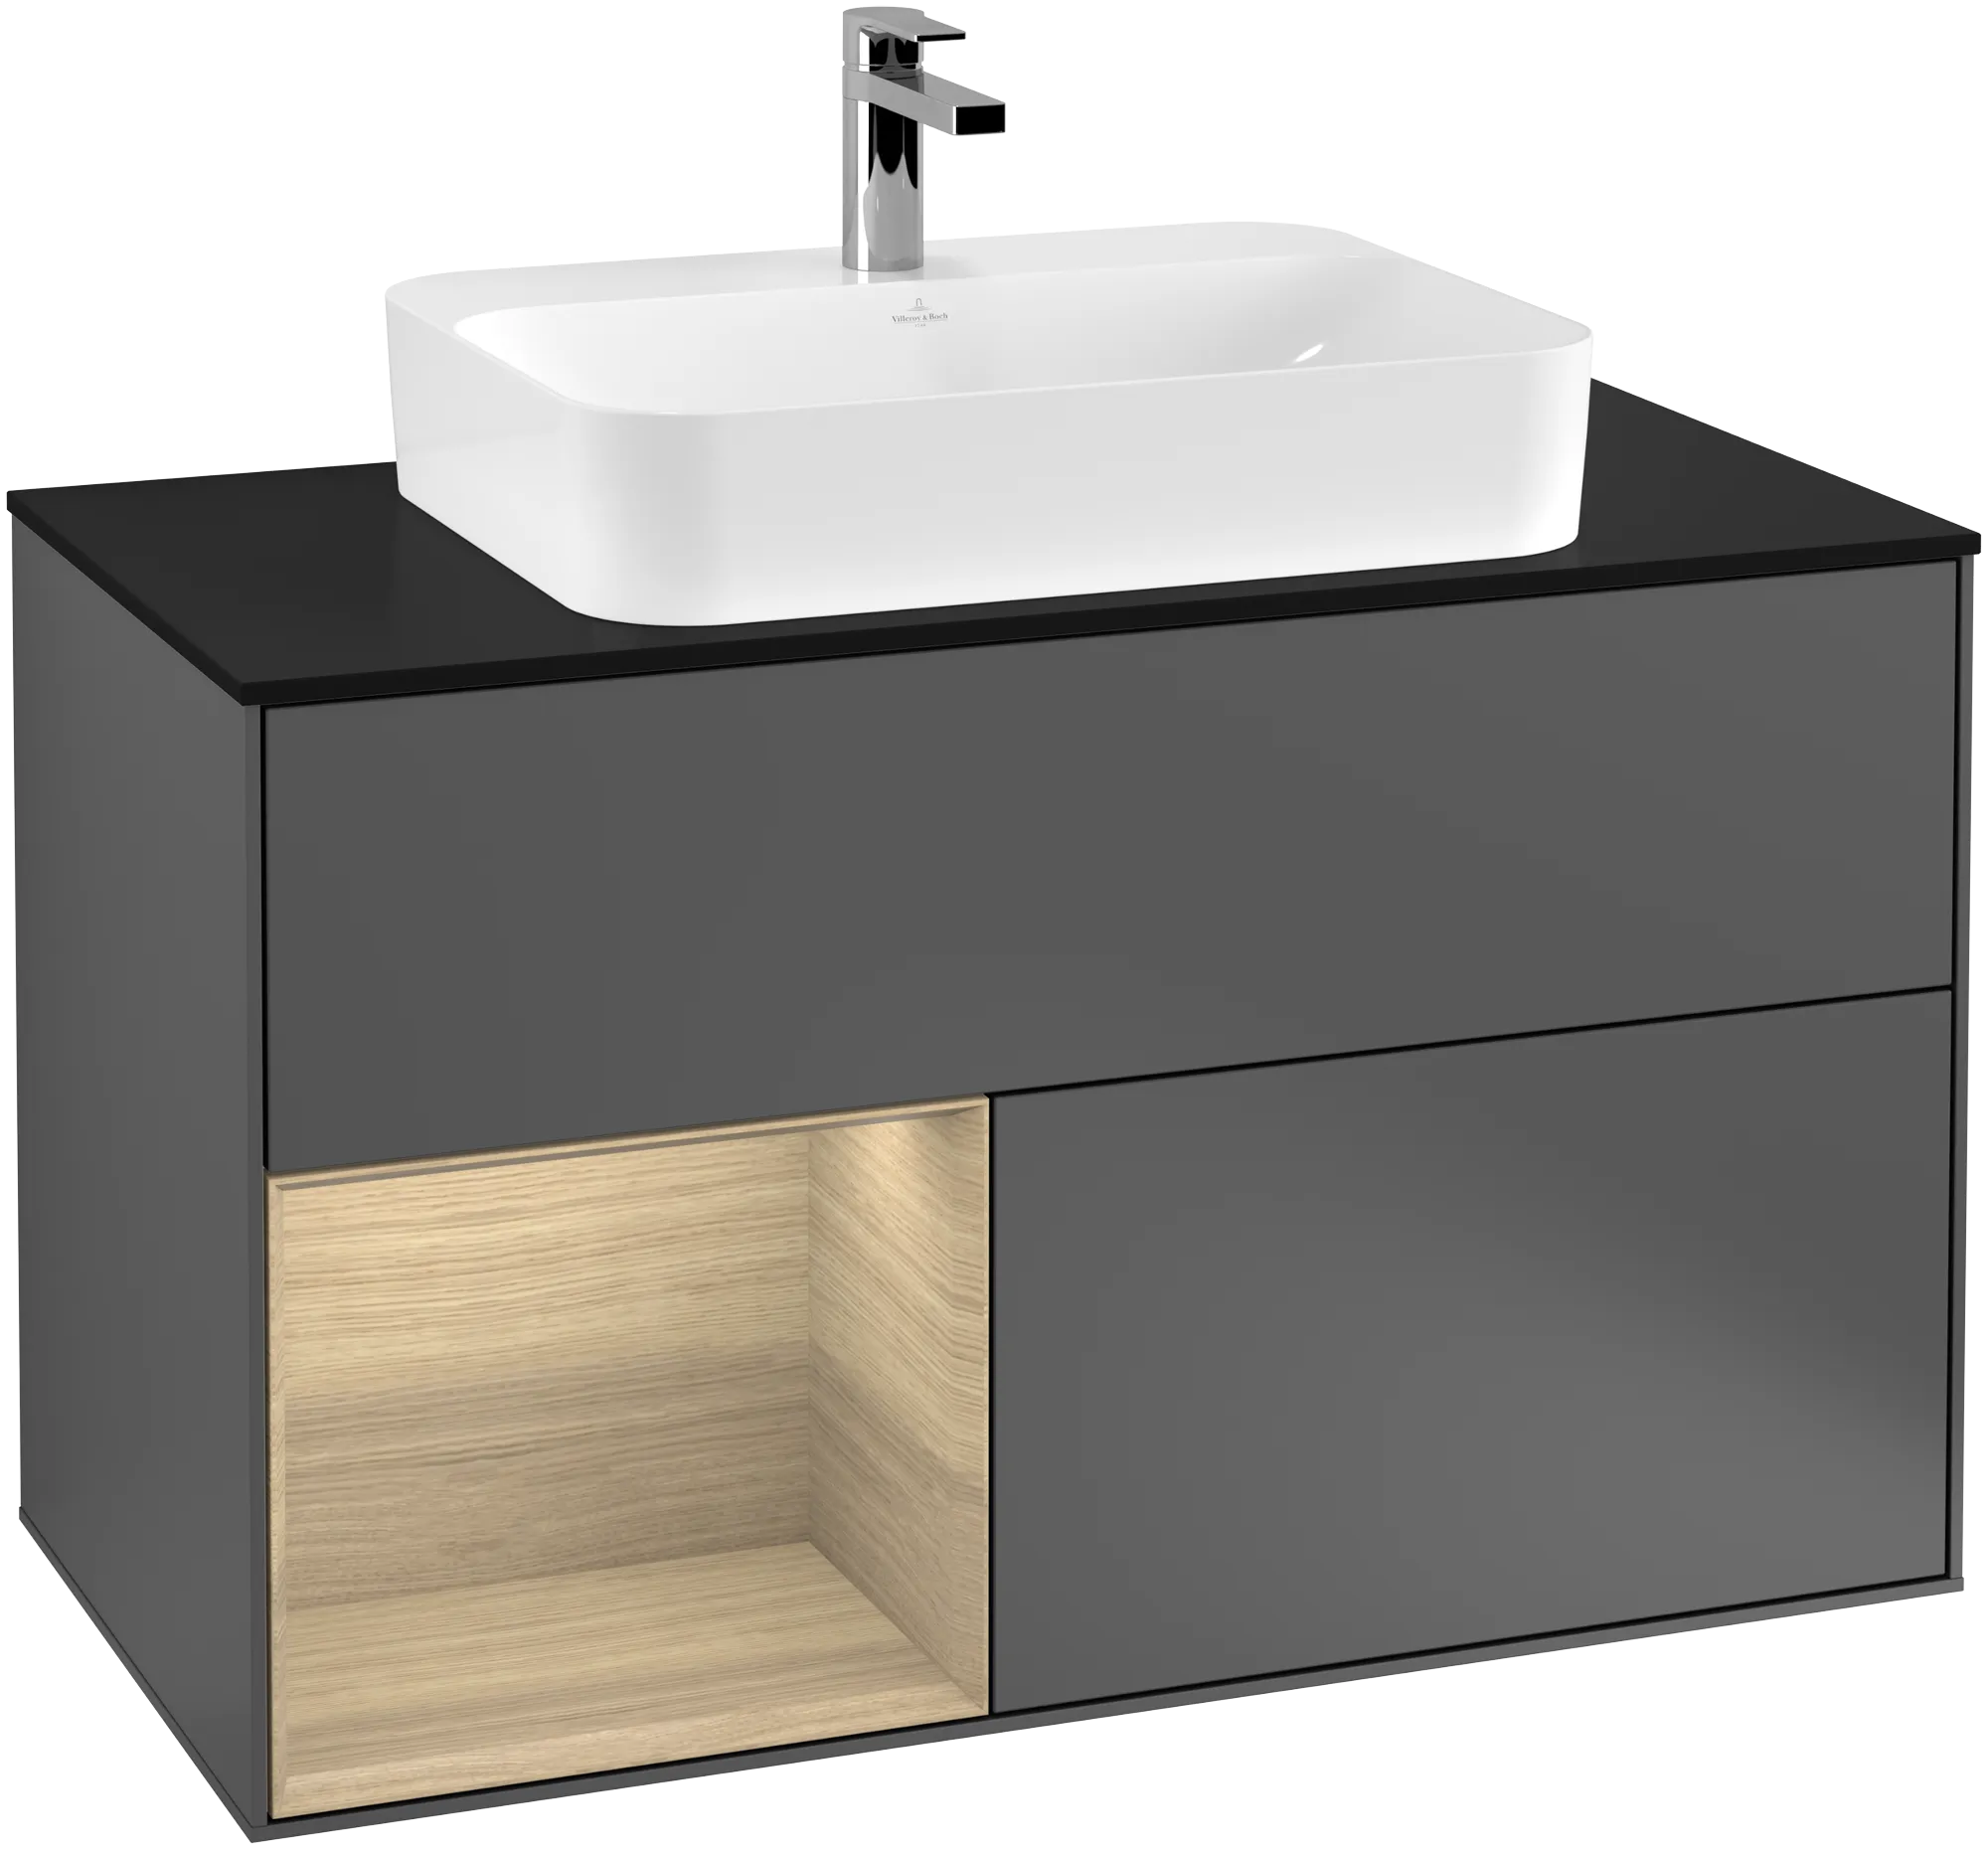 Picture of VILLEROY BOCH Finion Vanity unit, with lighting, 2 pull-out compartments, 1000 x 603 x 501 mm, Anthracite Matt Lacquer / Oak Veneer / Glass Black Matt #G362PCGK